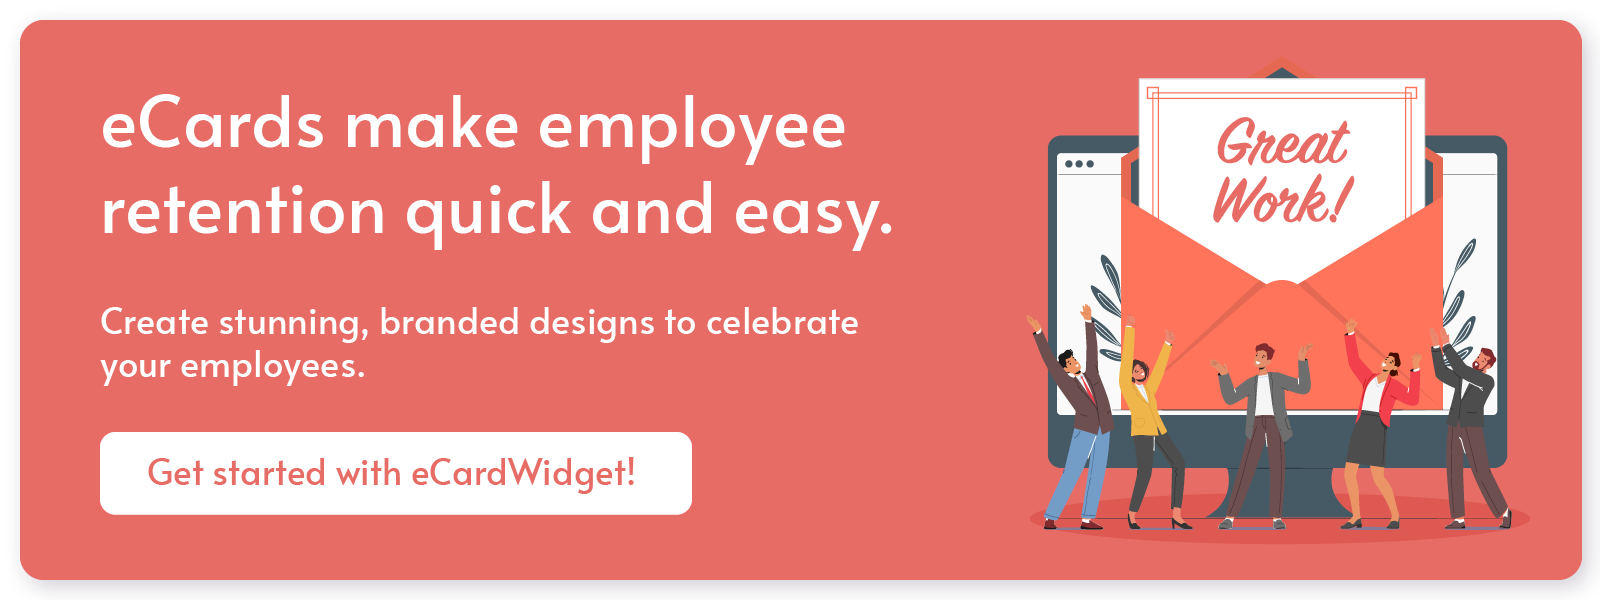 eCards make employee retention quick and easy. Create stunning, branded designs to celebrate your employees. Get started with eCardWidget. 